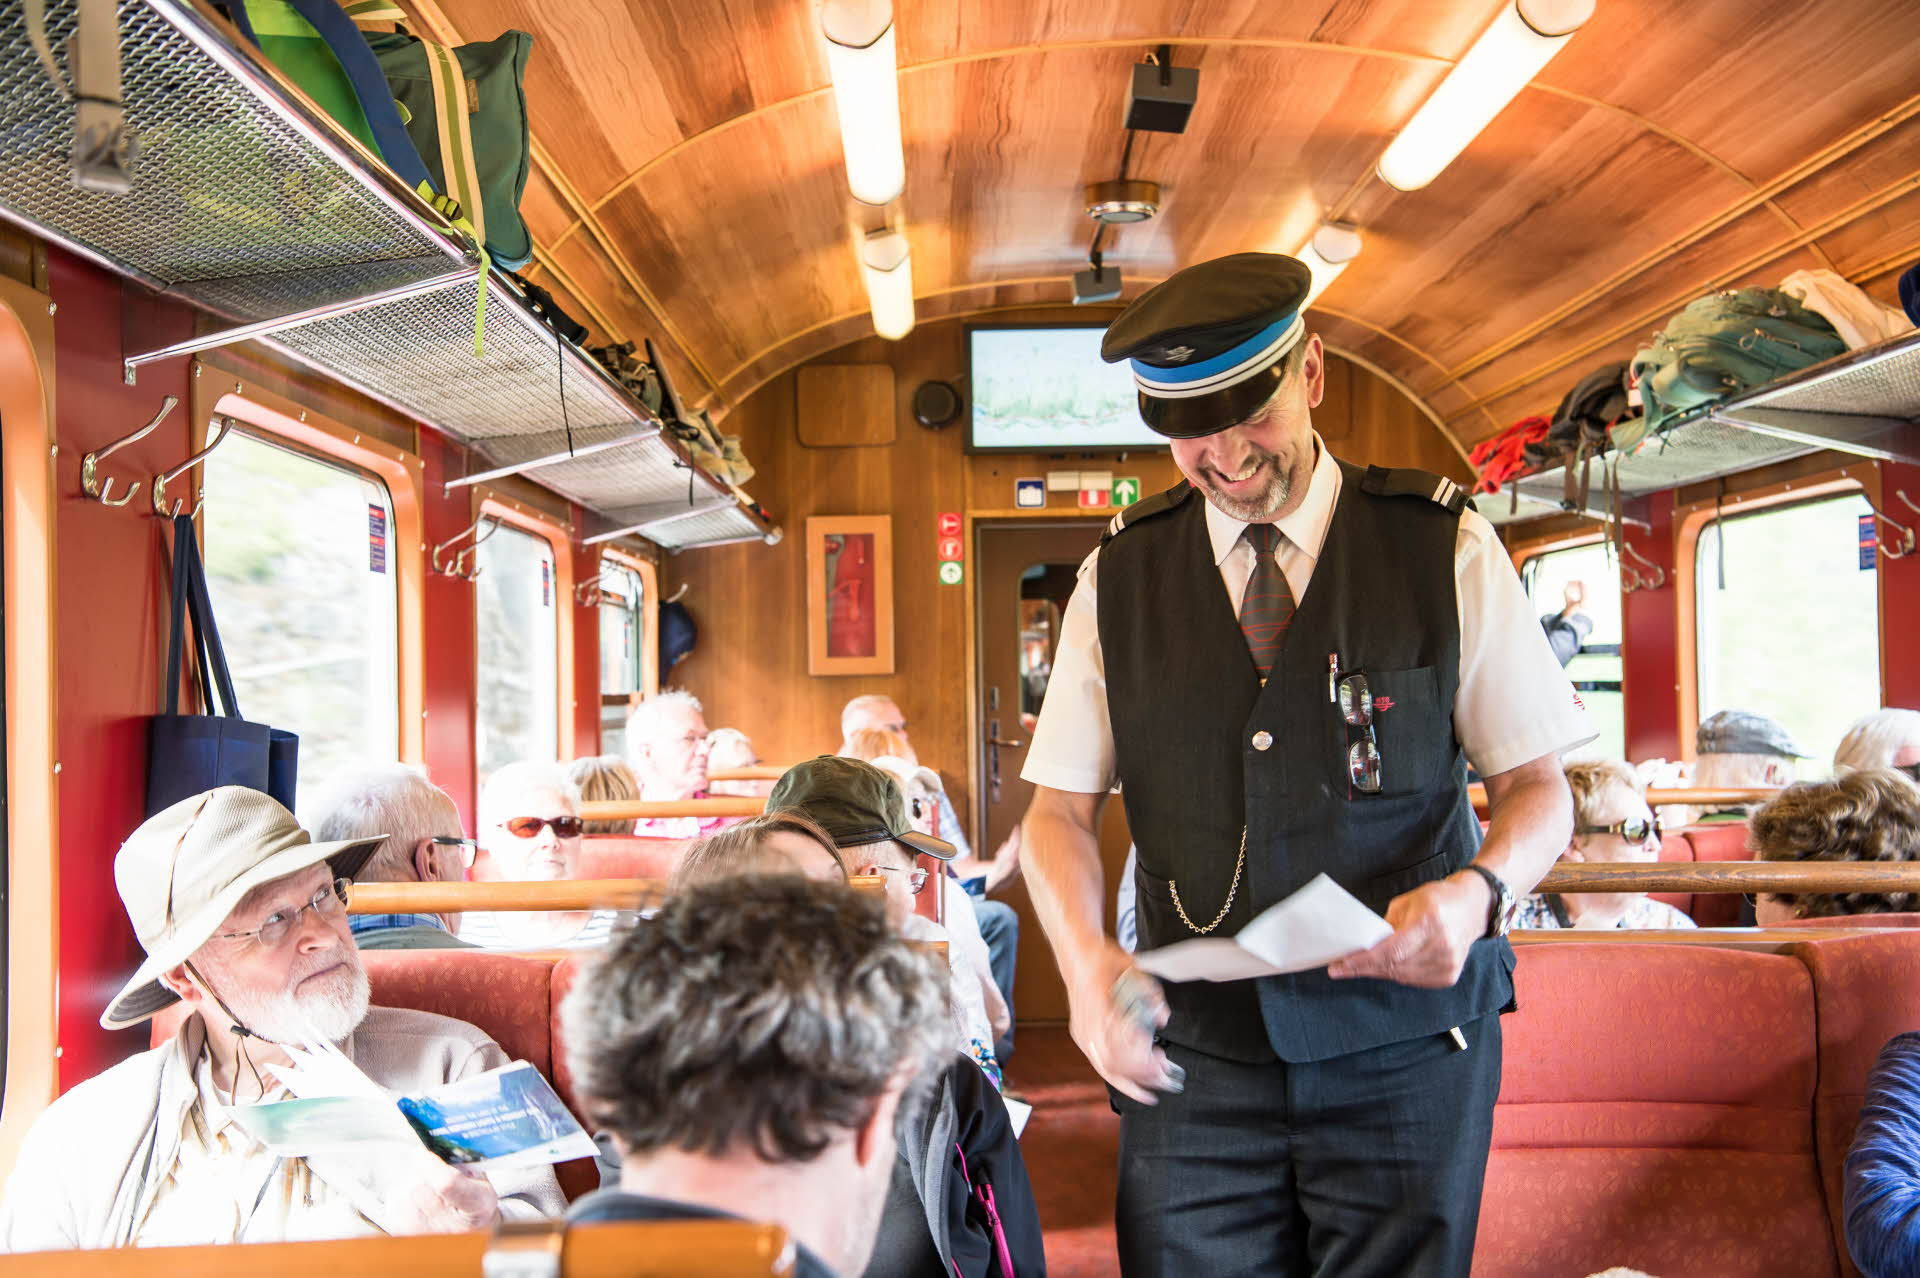 A ticket inspector in uniform and hat smiling while checking a group’s tickets on the Flåmsbana